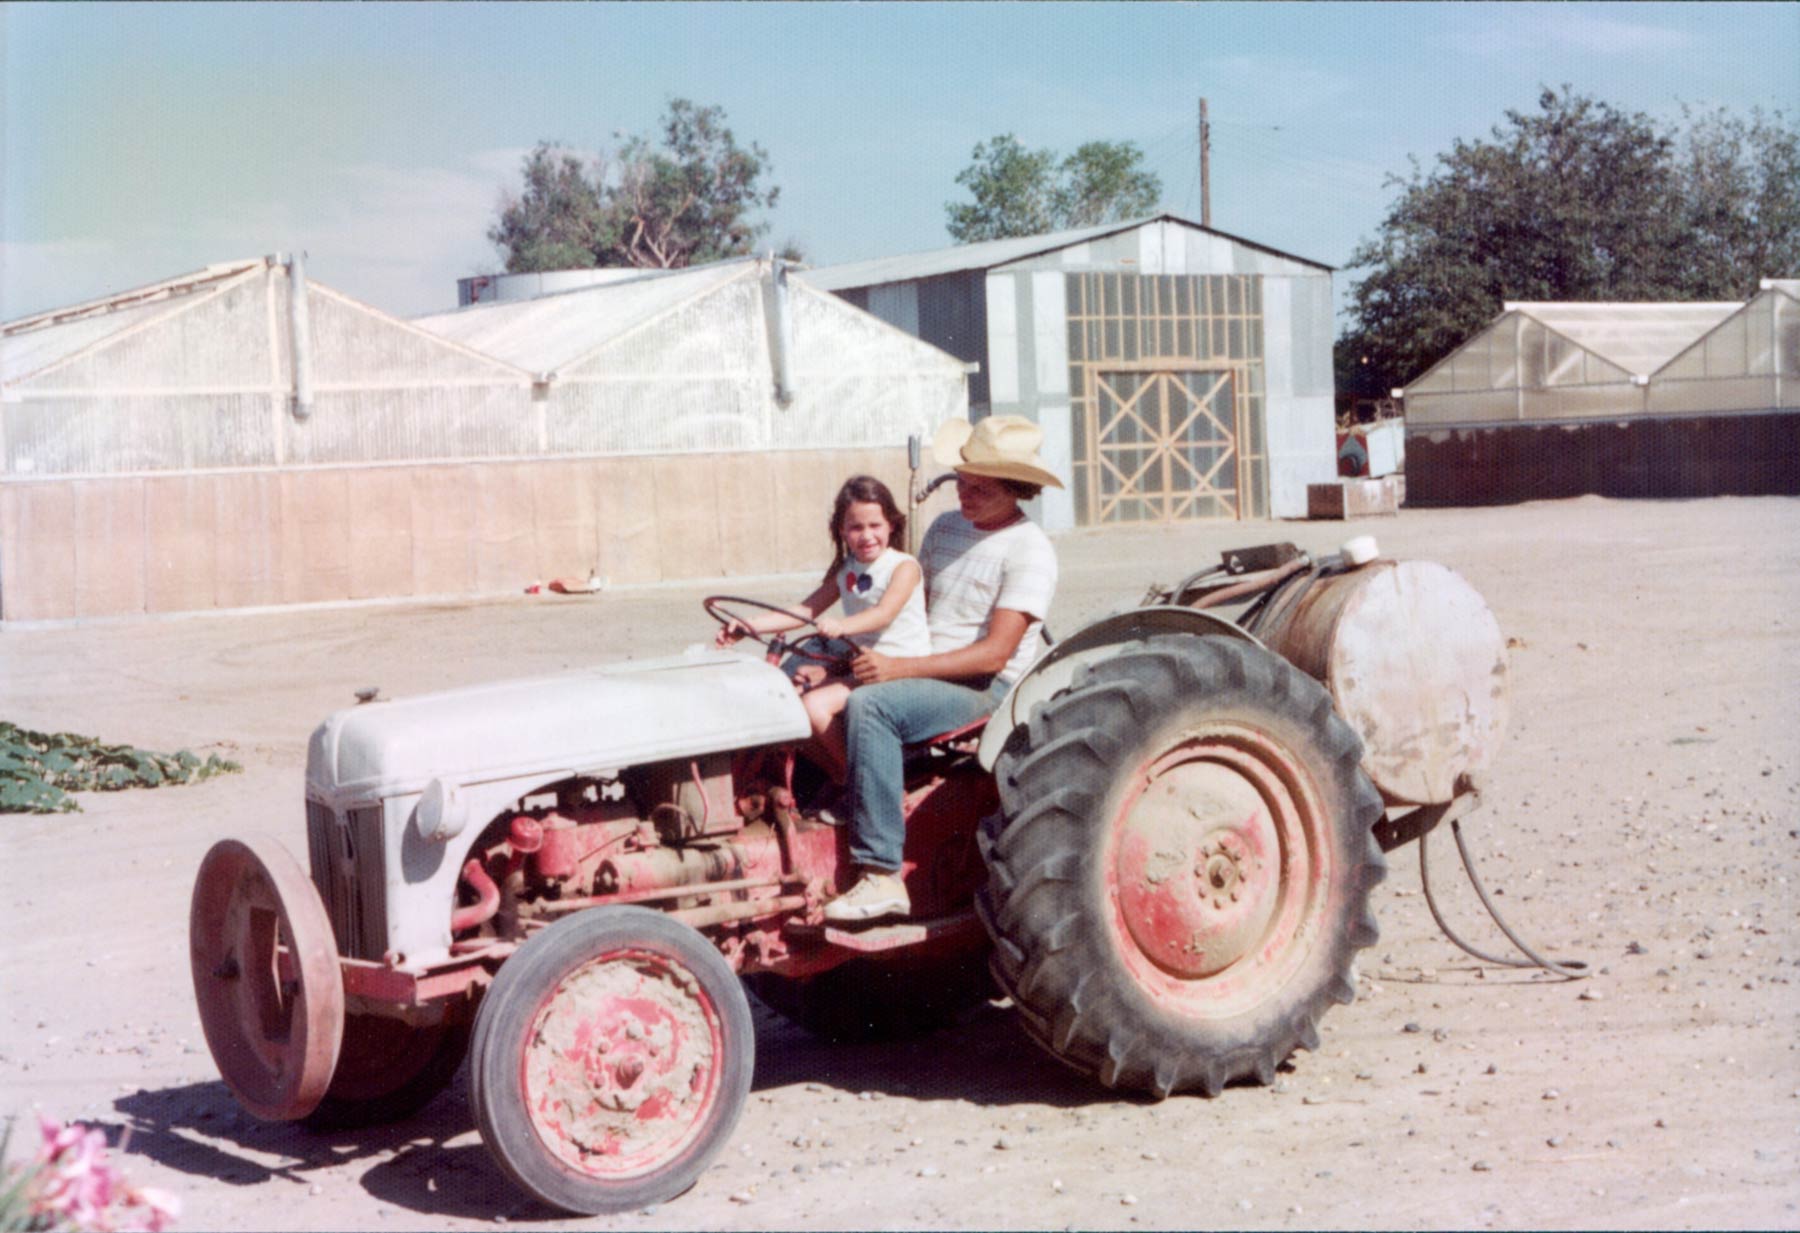 Charles Keenan riding-a tractor with young family member